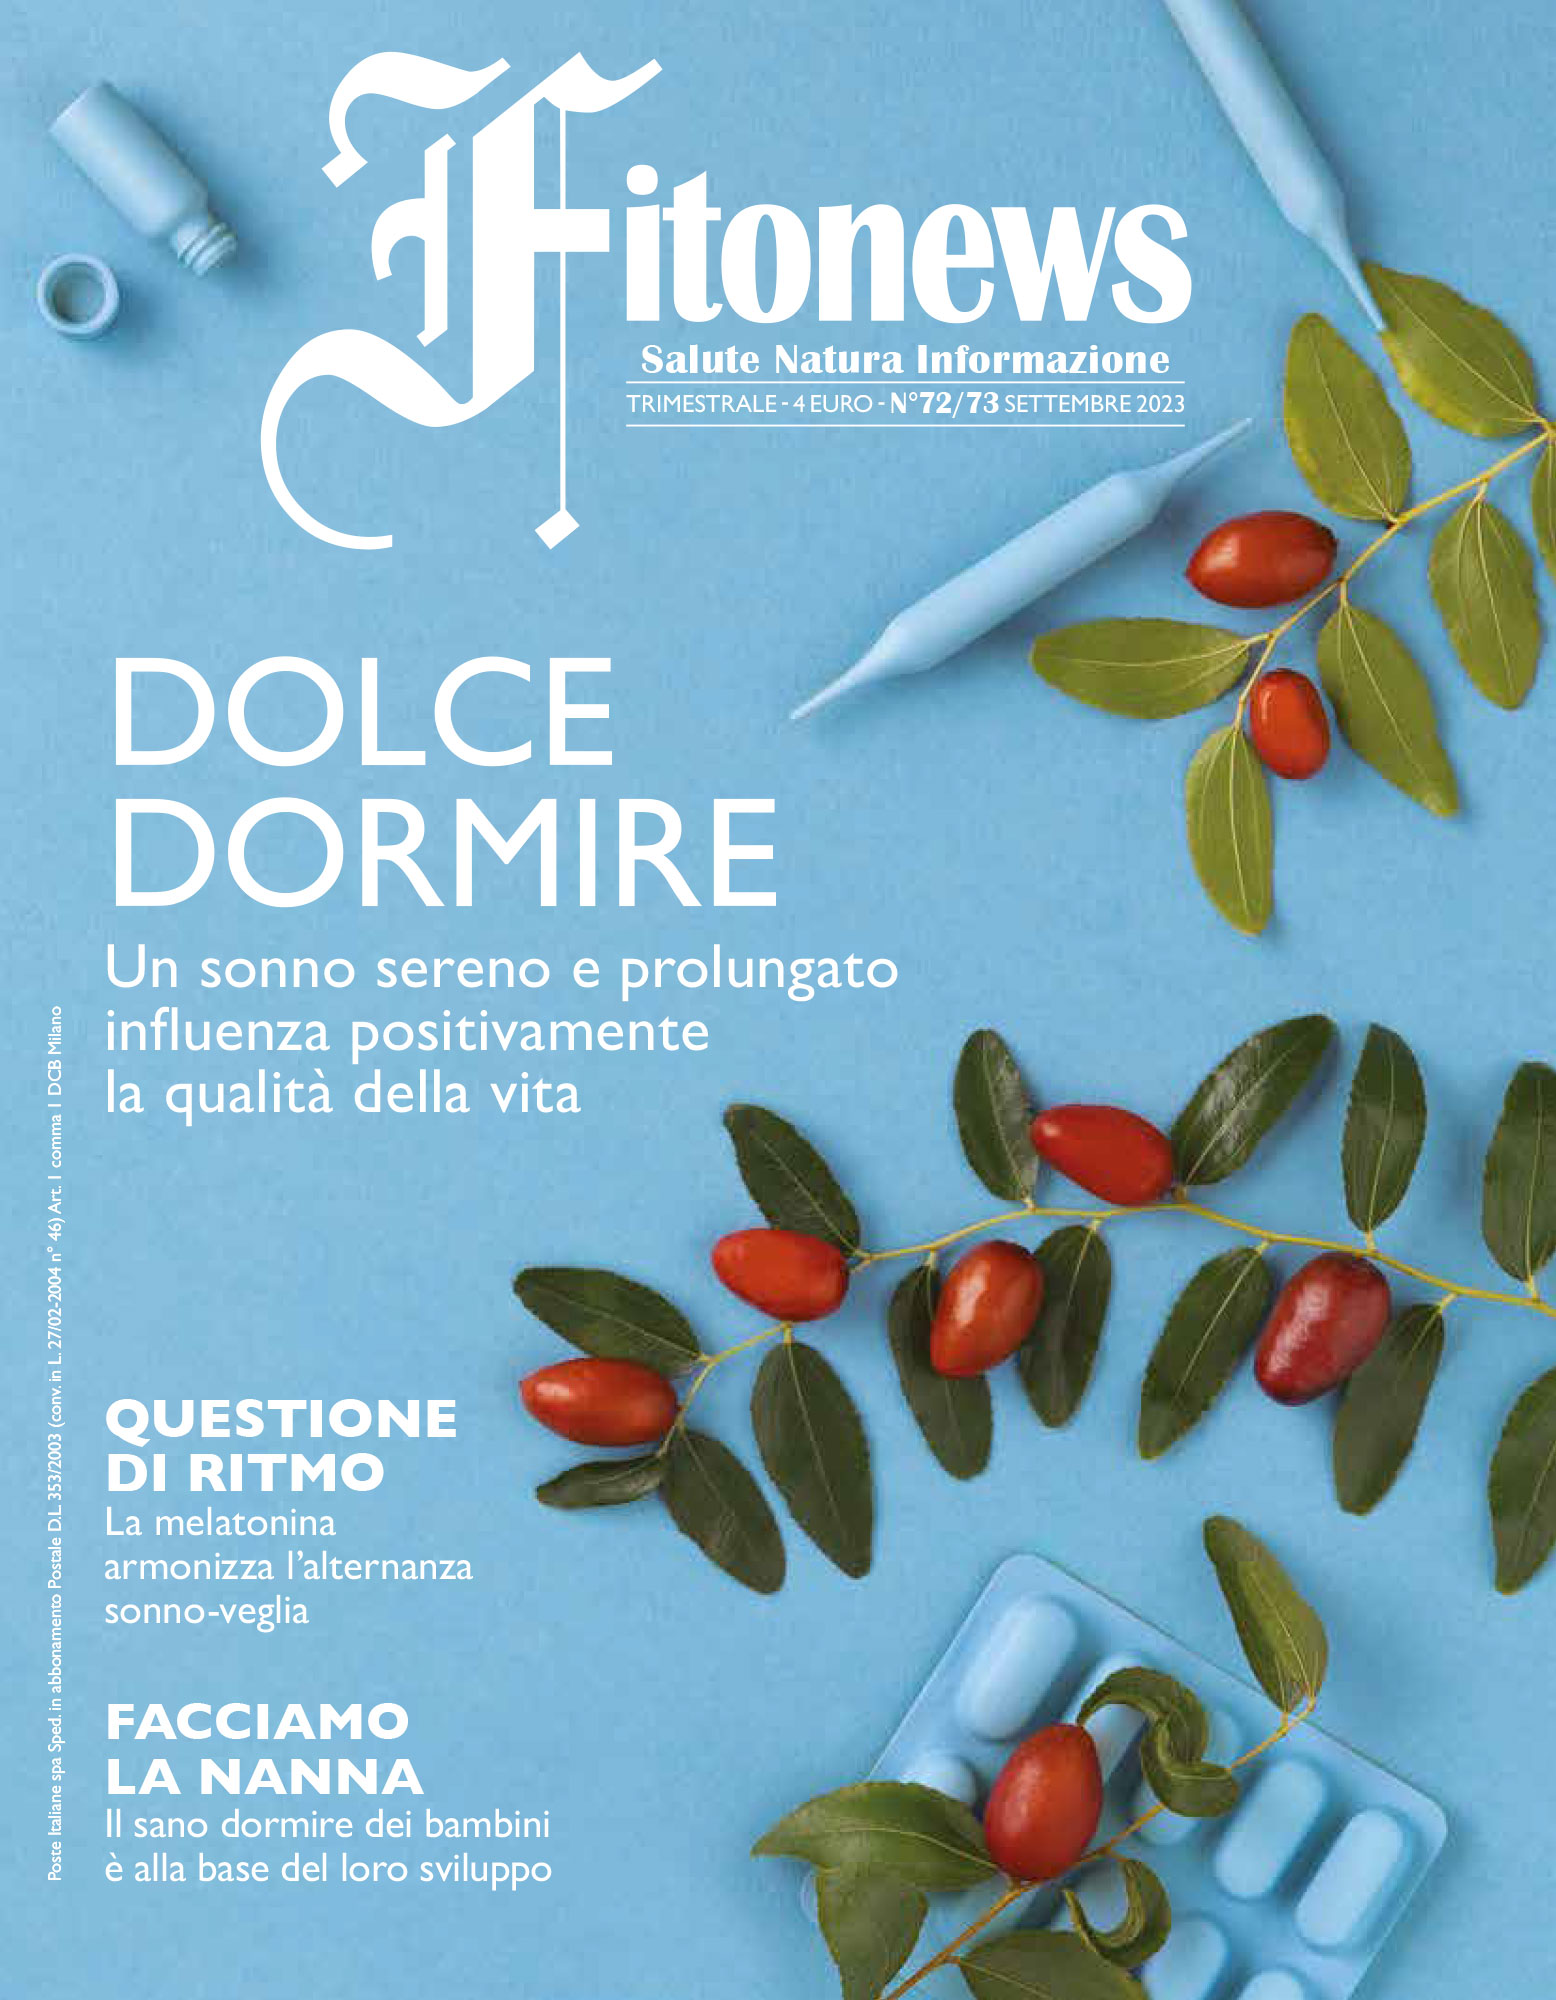 Dolce dormire – Fitonews n°72-73 2023